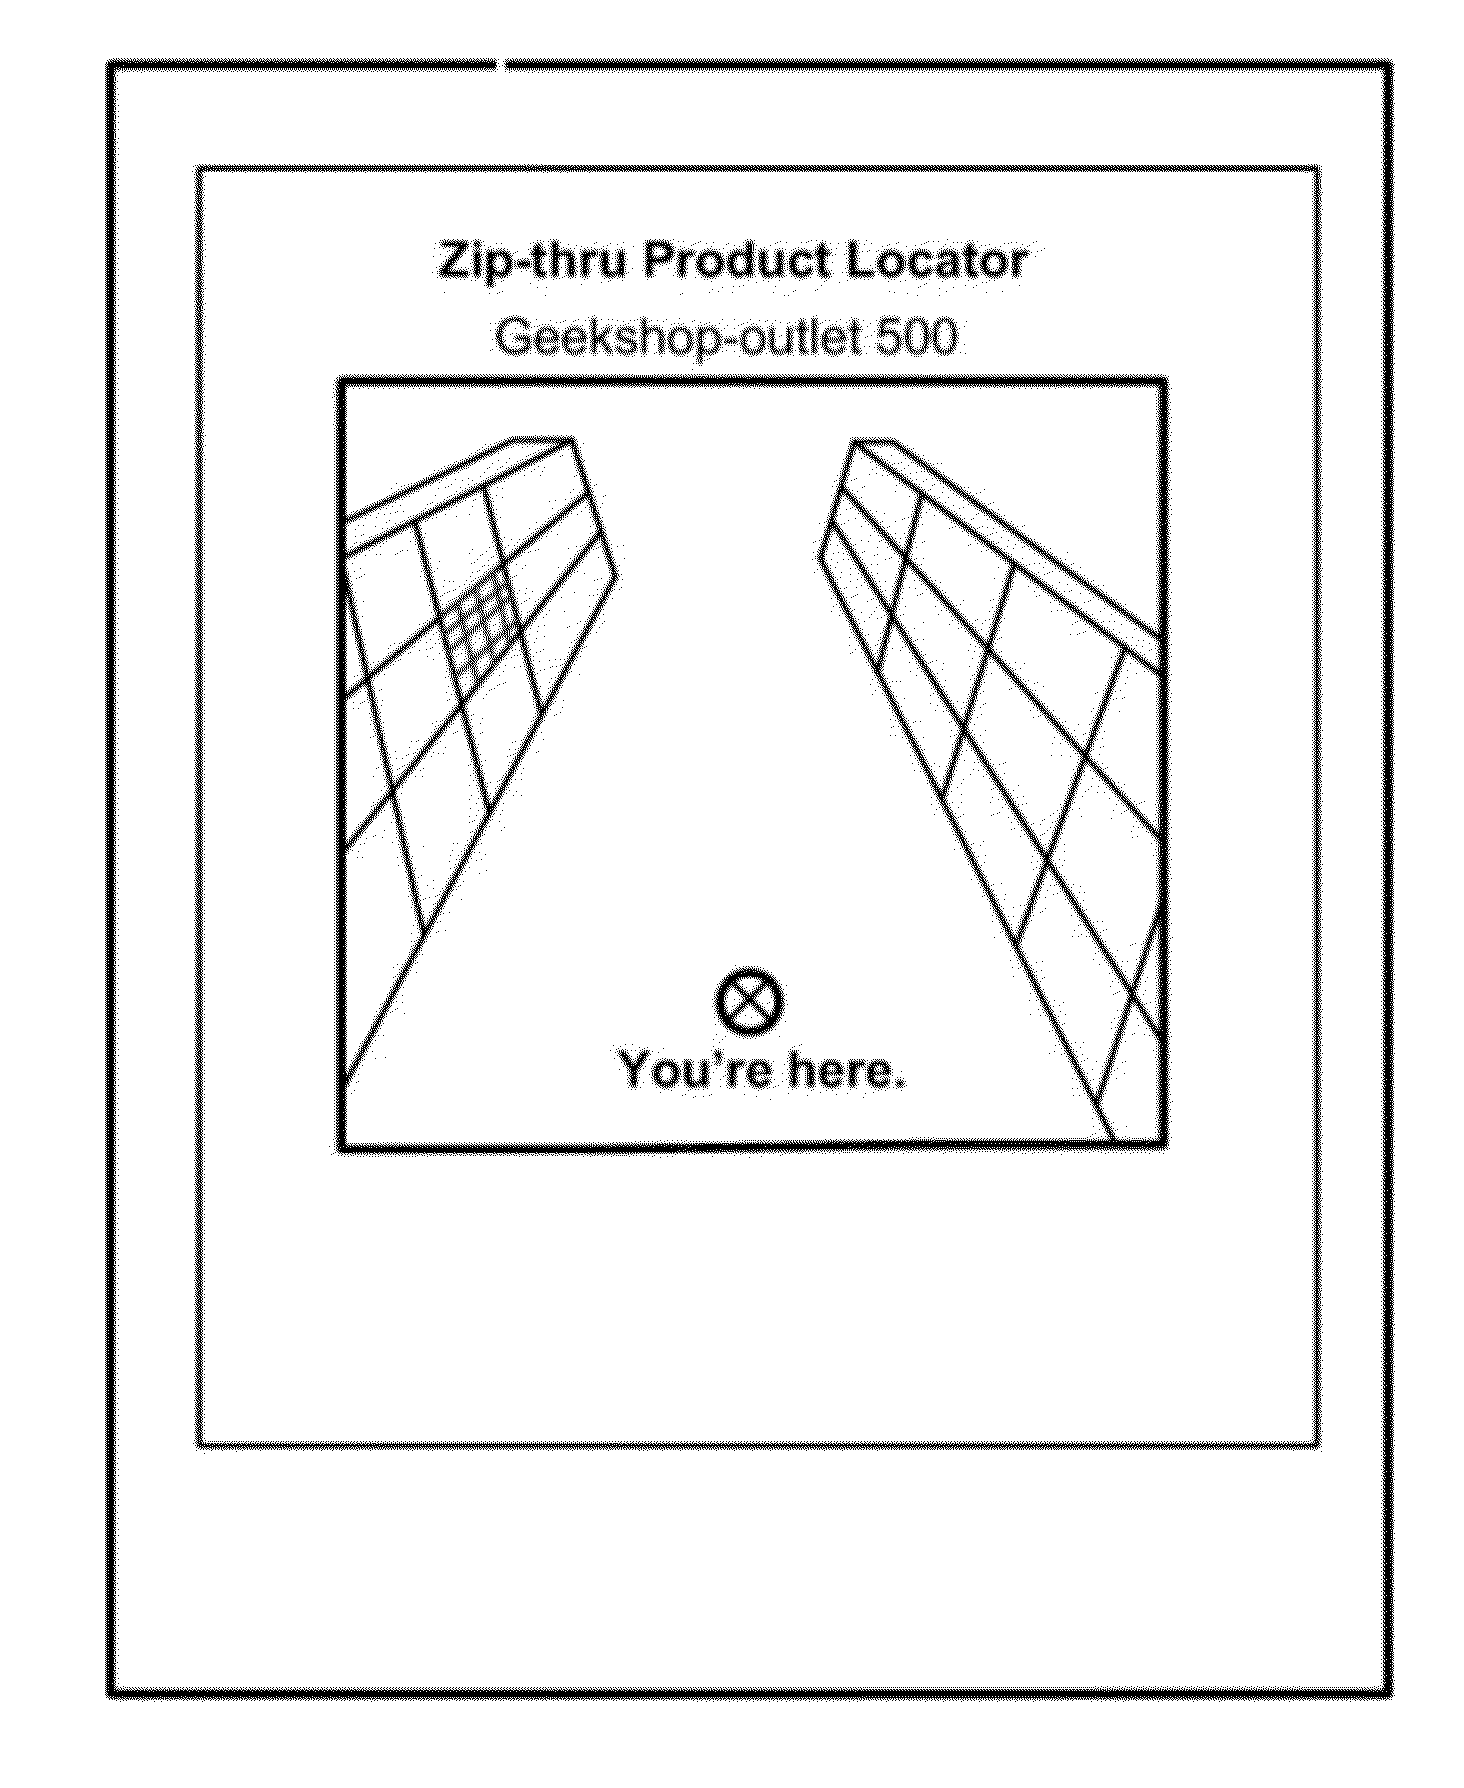 Method and system for locating a product in a store using a mobile device